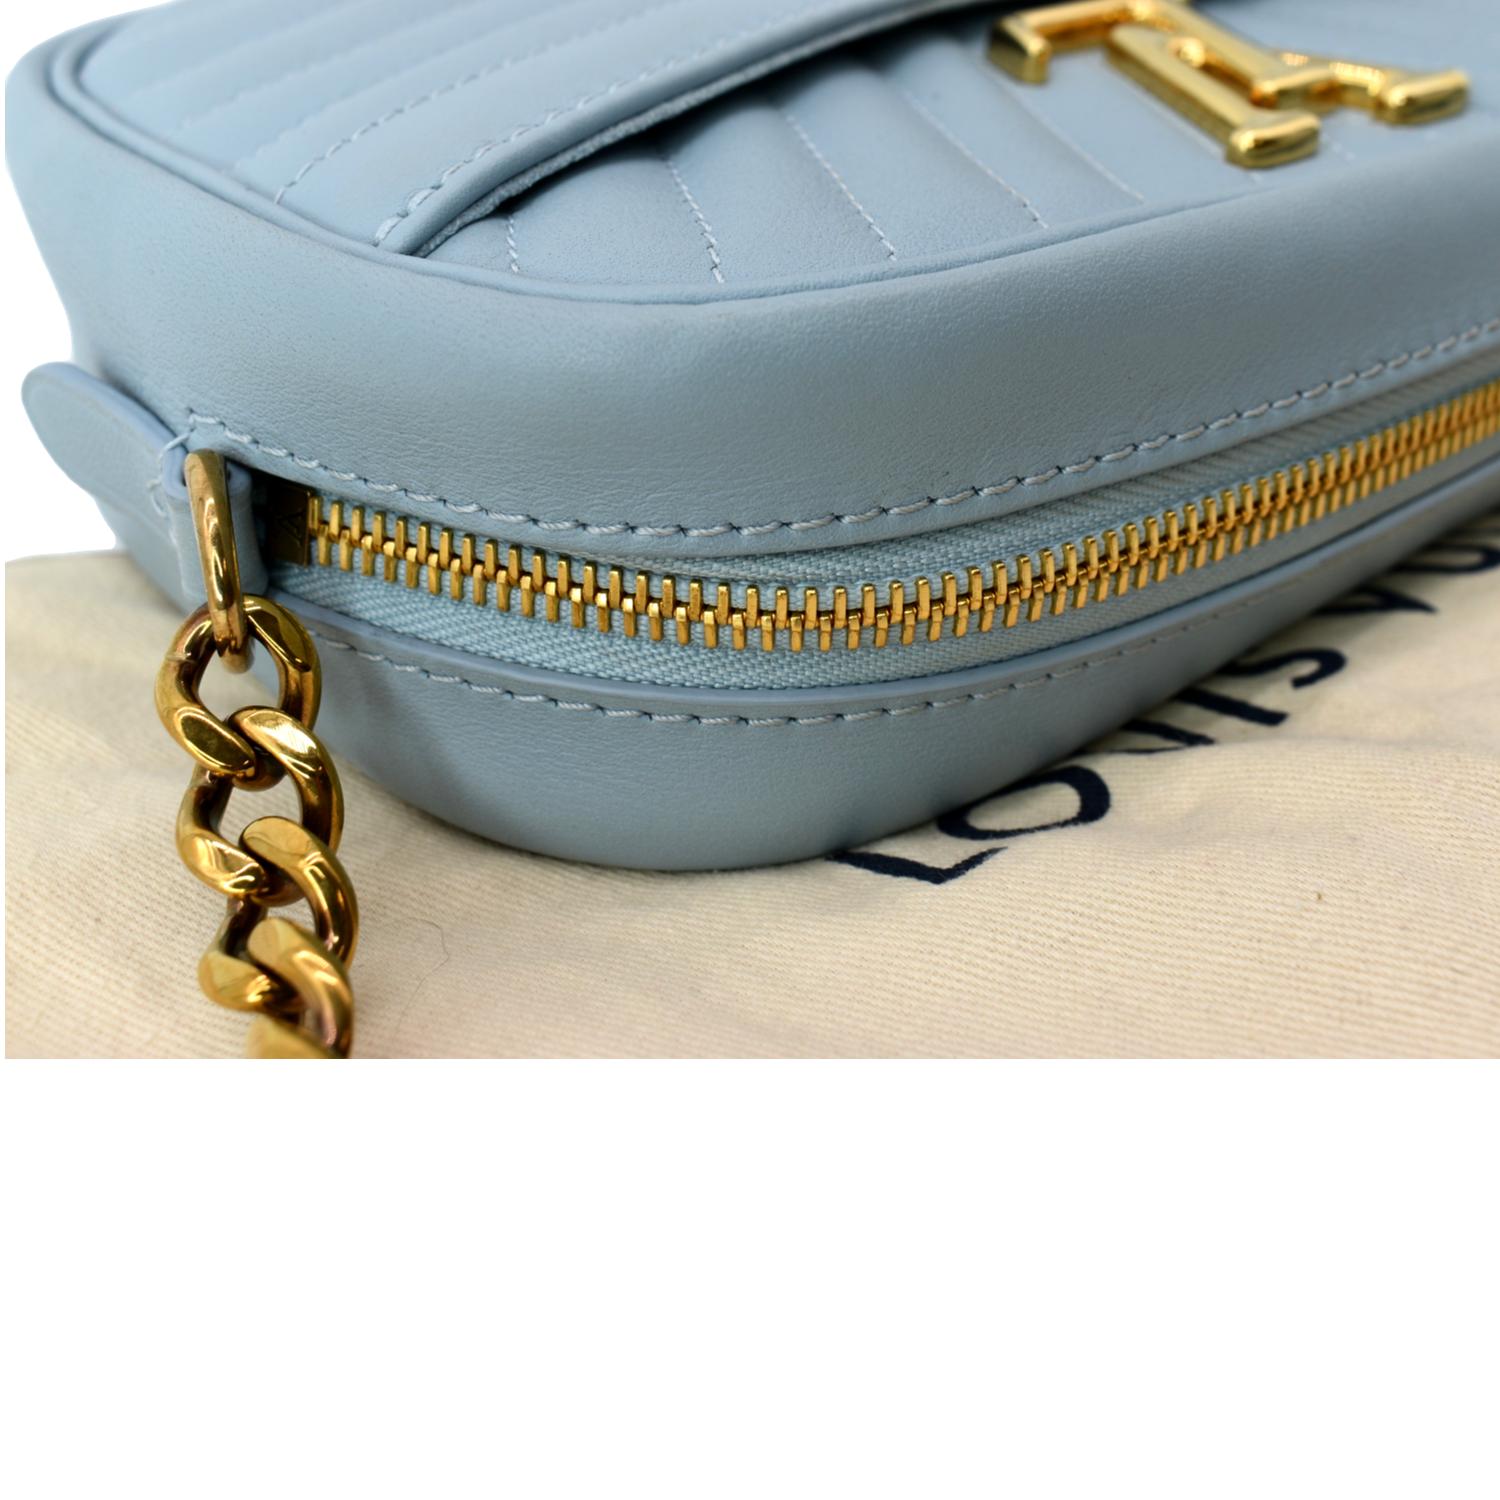 Louis Vuitton New Wave Quilted Leather Camera Bag in Baby Blue - ShopStyle